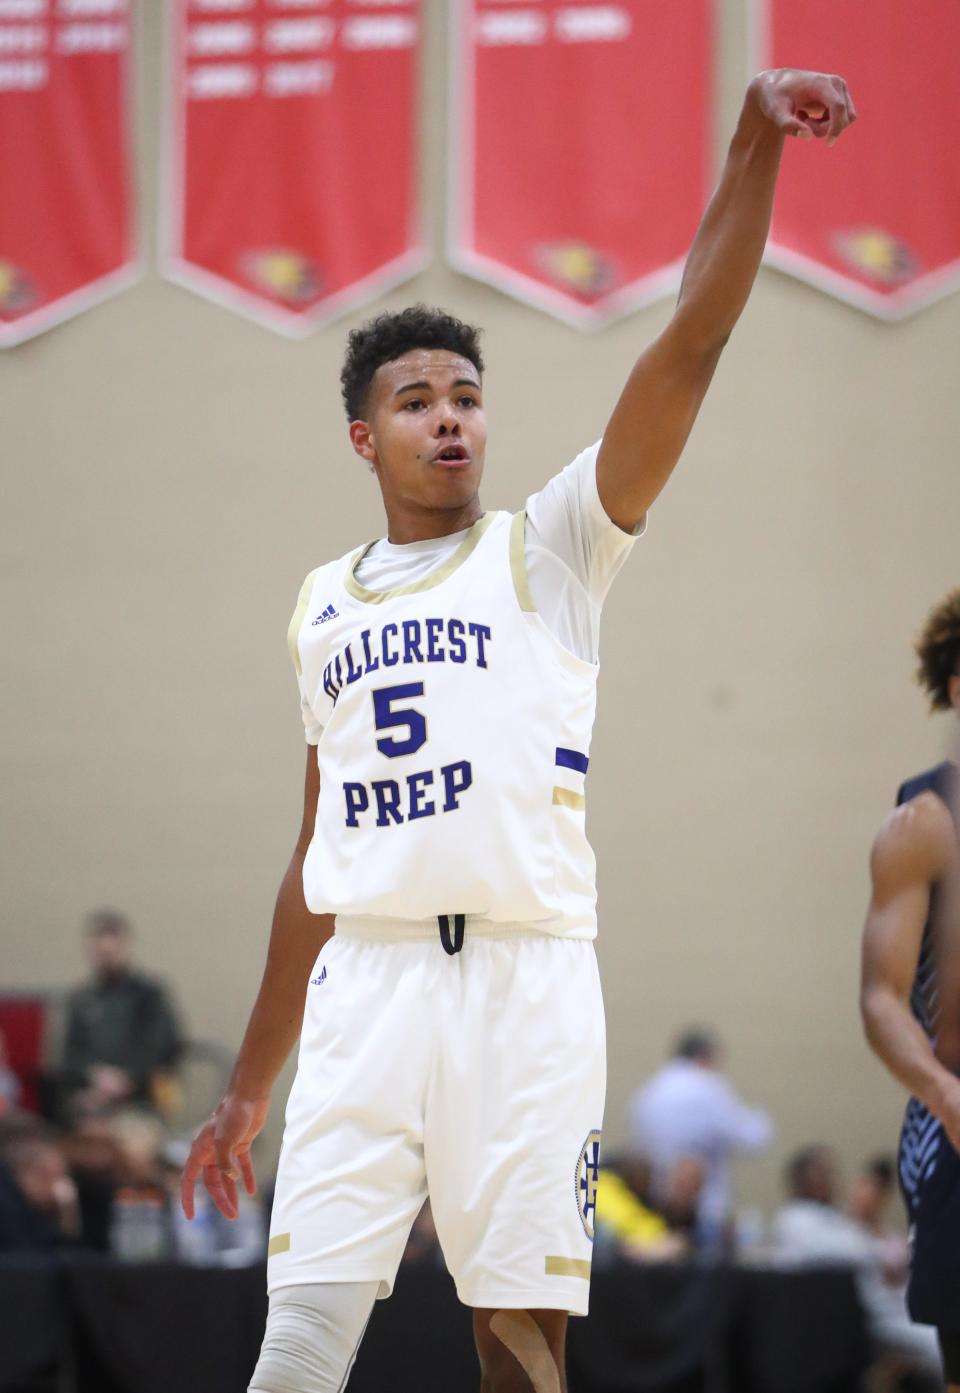 Hillcrest Prep guard Puff Johnson (5) during the 2019 Hoophall West basketball tournament at Chaparral High School.